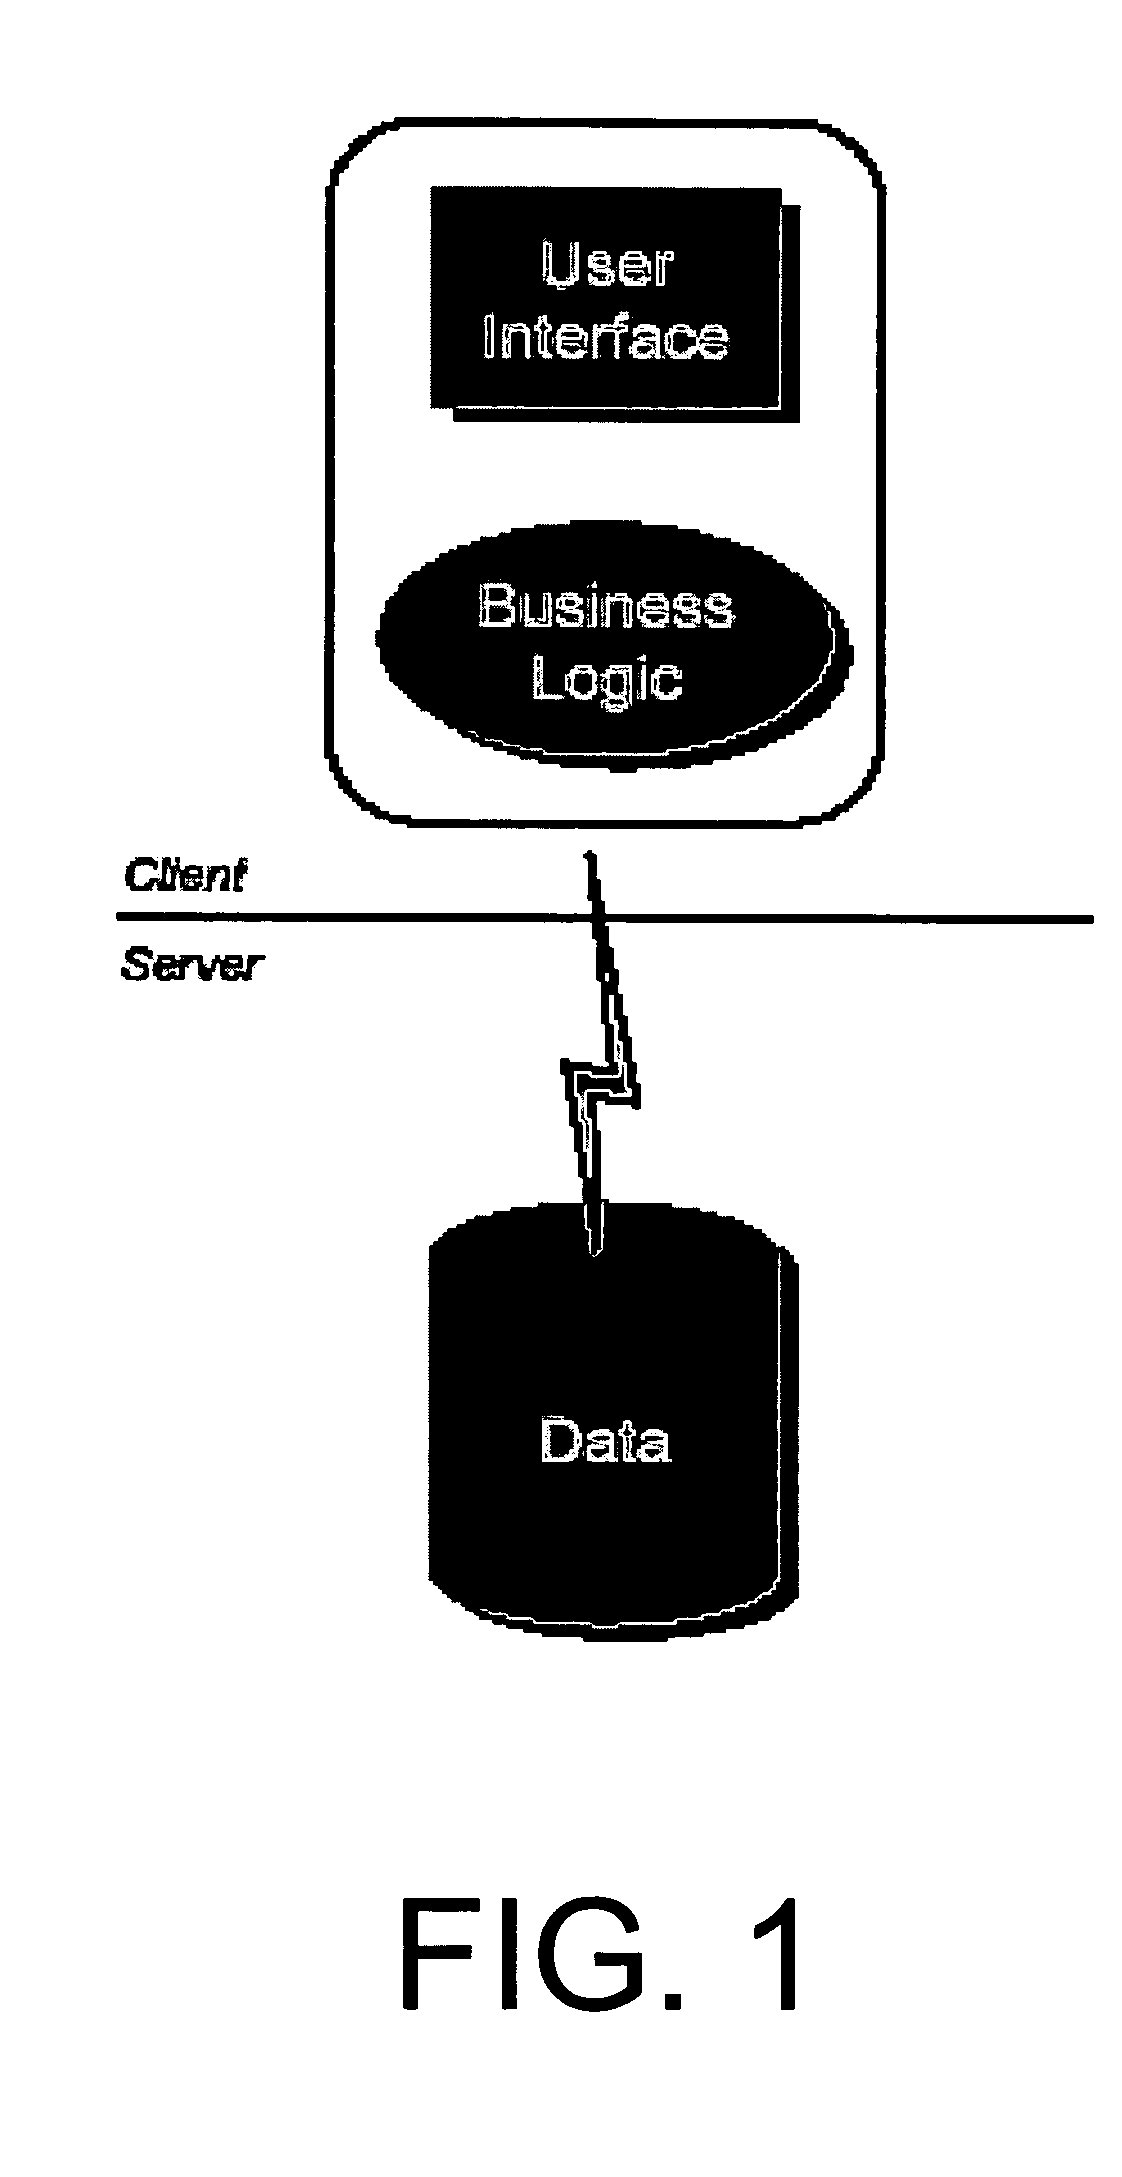 System and method for developing new services from legacy computer applications